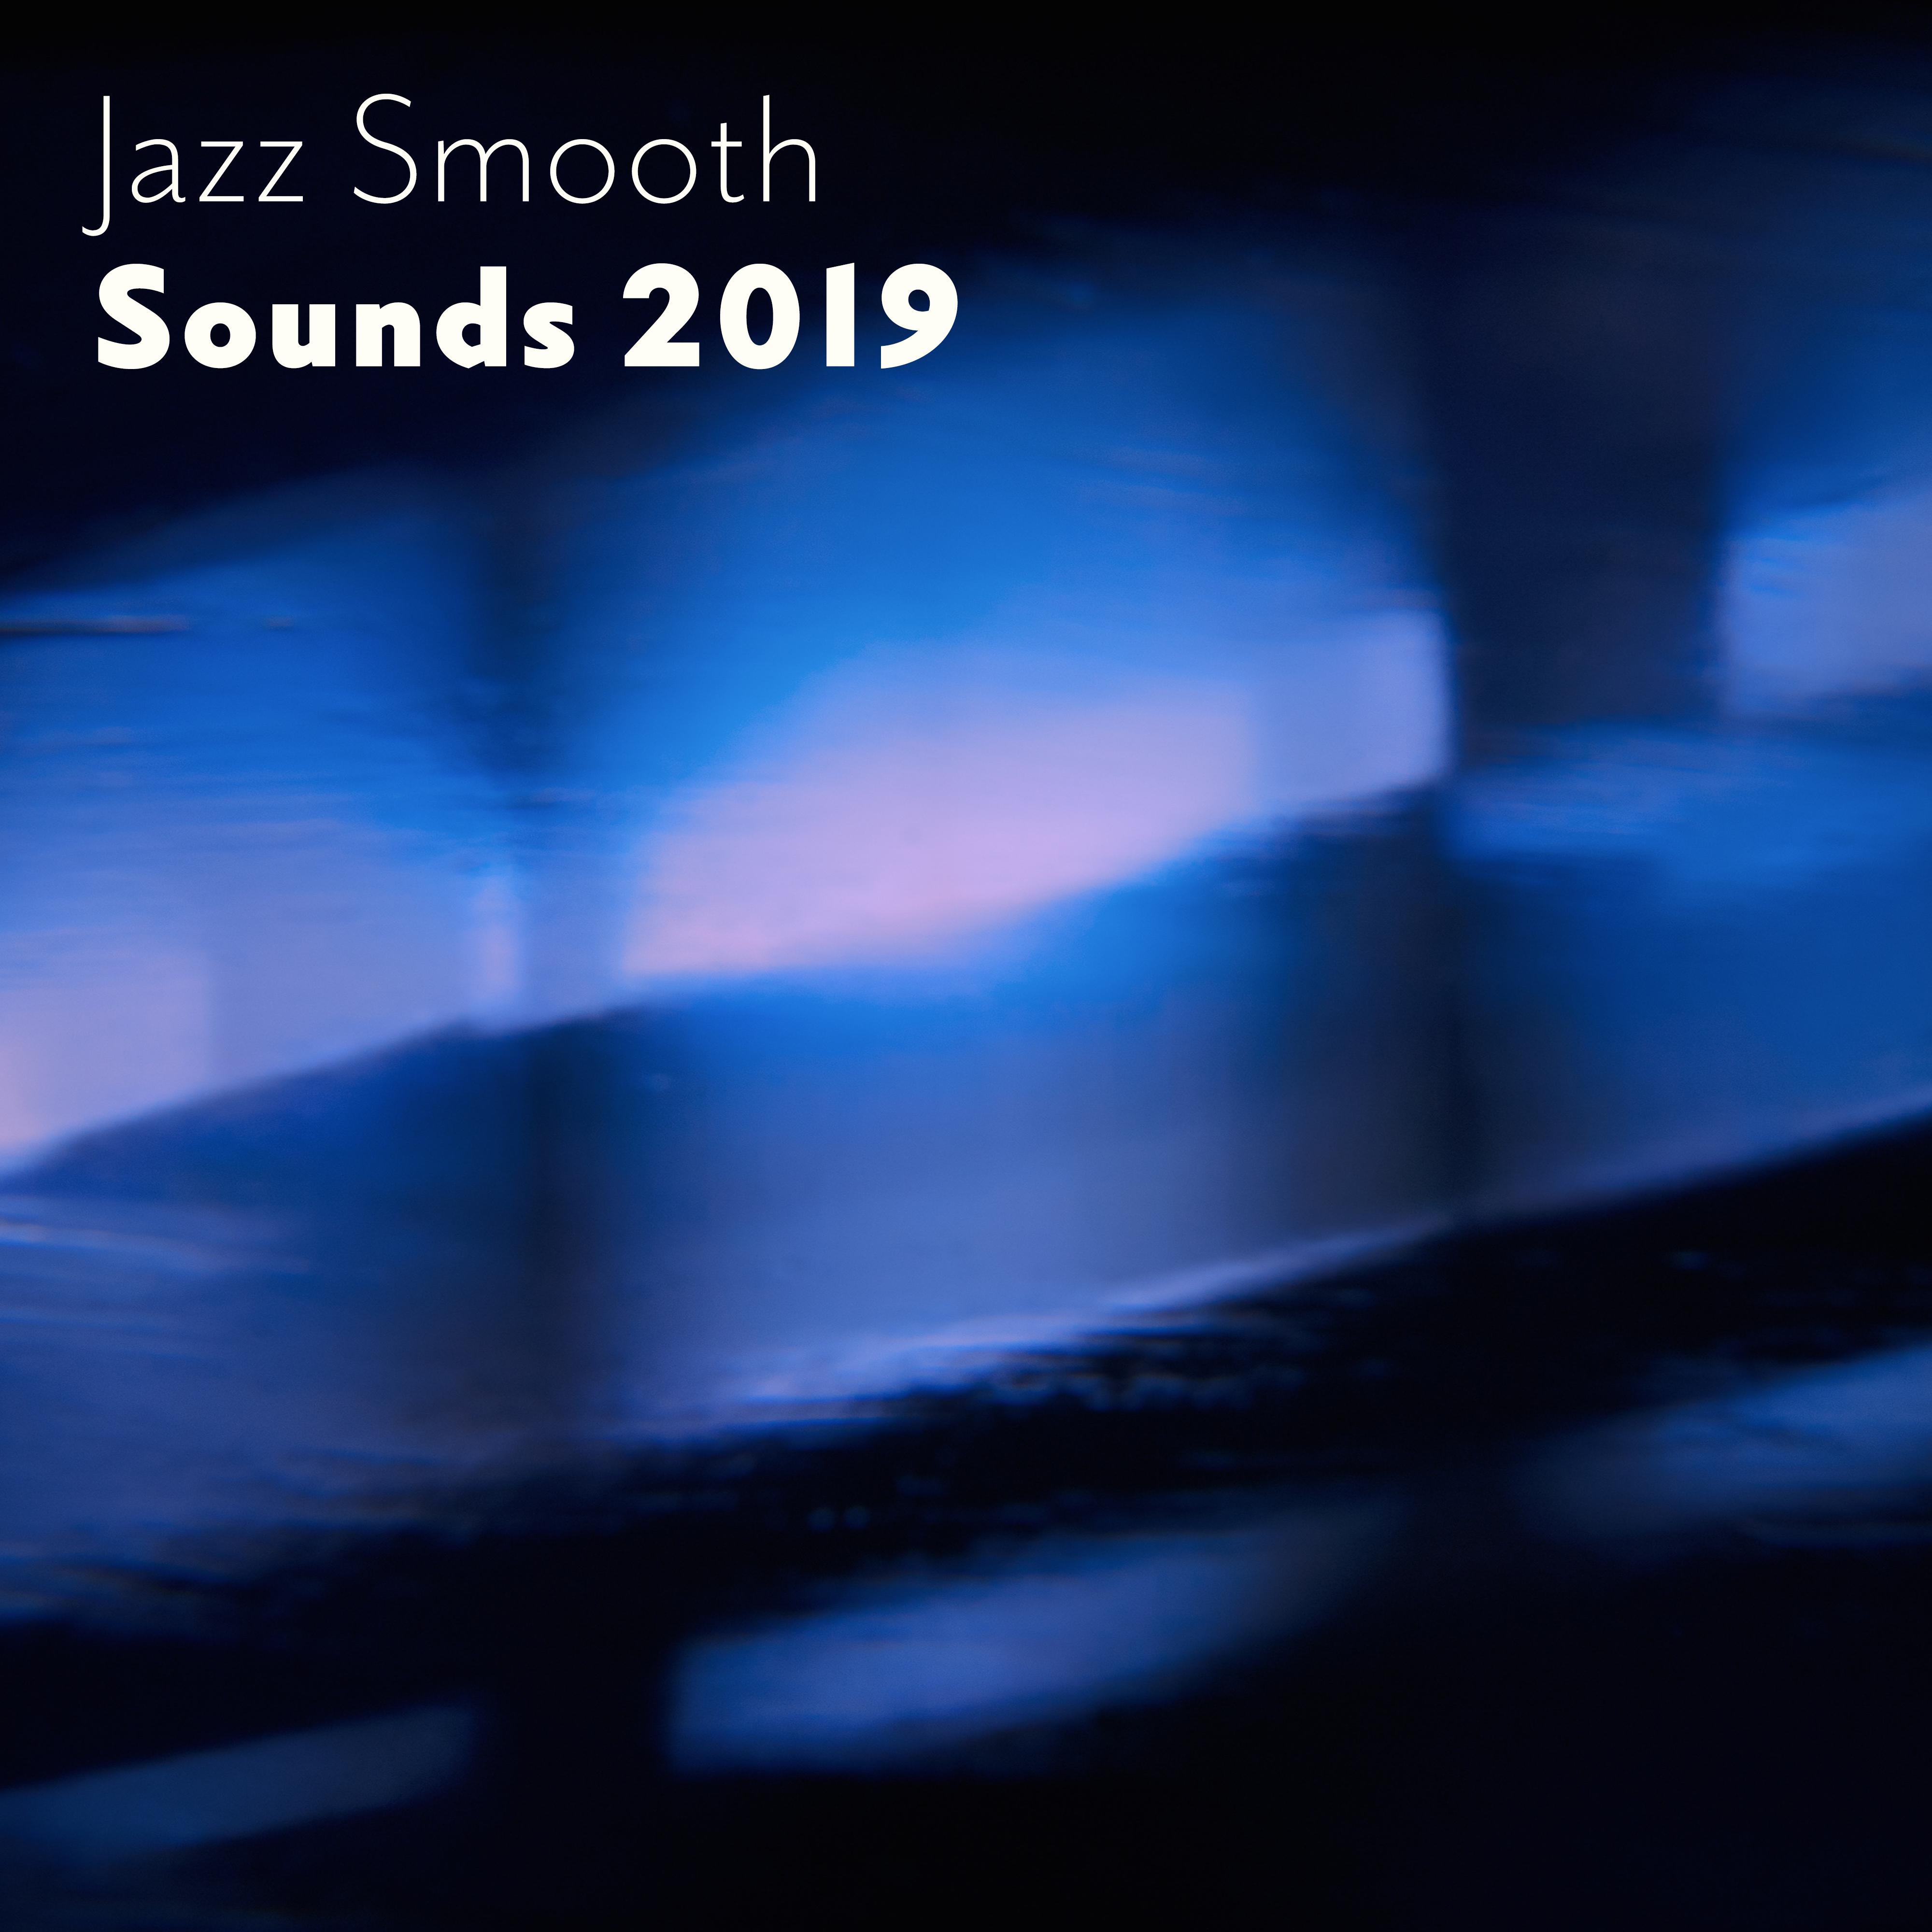 Jazz Smooth Sounds 2019: Relaxing Compilation of 15 Instrumental Jazz Tracks, Vintage Piano & Sax Melodies, Chillout Rhythms